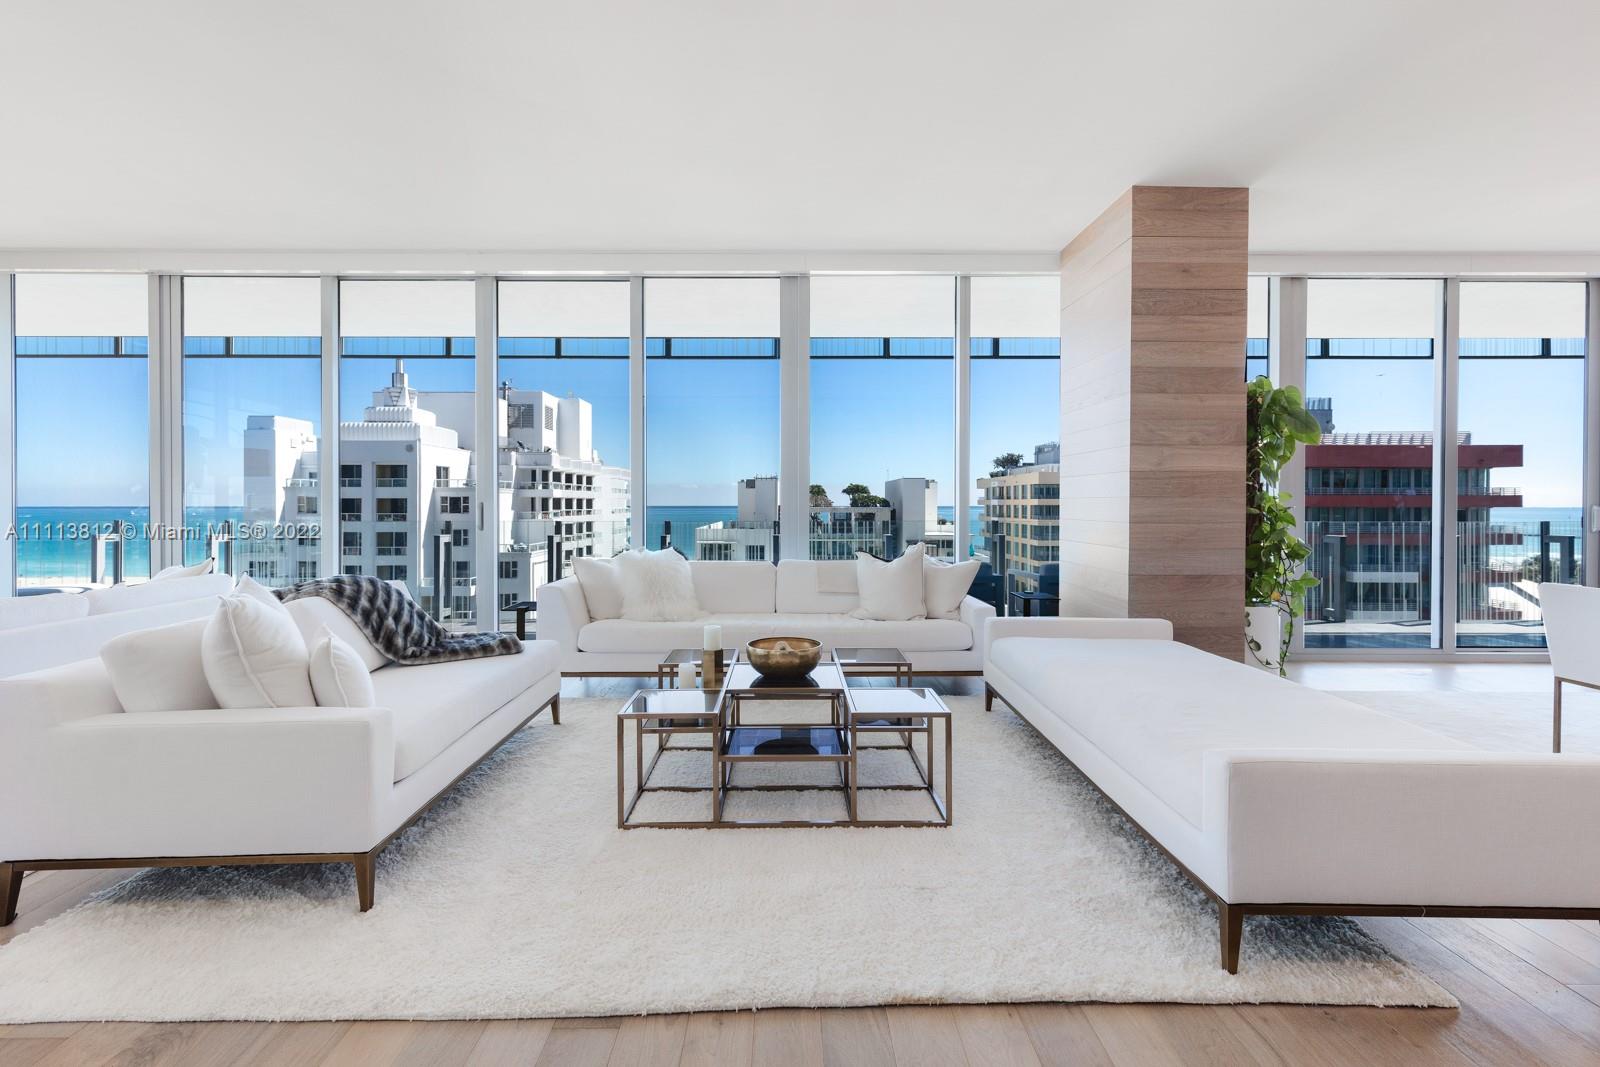 Spanning the entire 9th floor, this expansive residence is the perfect place to call home. Located on the famous Ocean Drive in the heart of the South of Fifth neighborhood boasting 360 degree views through floor to ceiling glass windows, 10 FT ceilings, a Calcutta marble kitchen with Gaggenau appliances and wood flooring throughout. Designed by Architect Rene Gonzalez, engaging our senses with inspiration from the surrounding landscape, designed with an all glass exterior to combine interiors with exterior spaces. Residents of GLASS are offered beach service, a beautiful pool area with Jacuzzi, boutique gym and a full time estate manager.